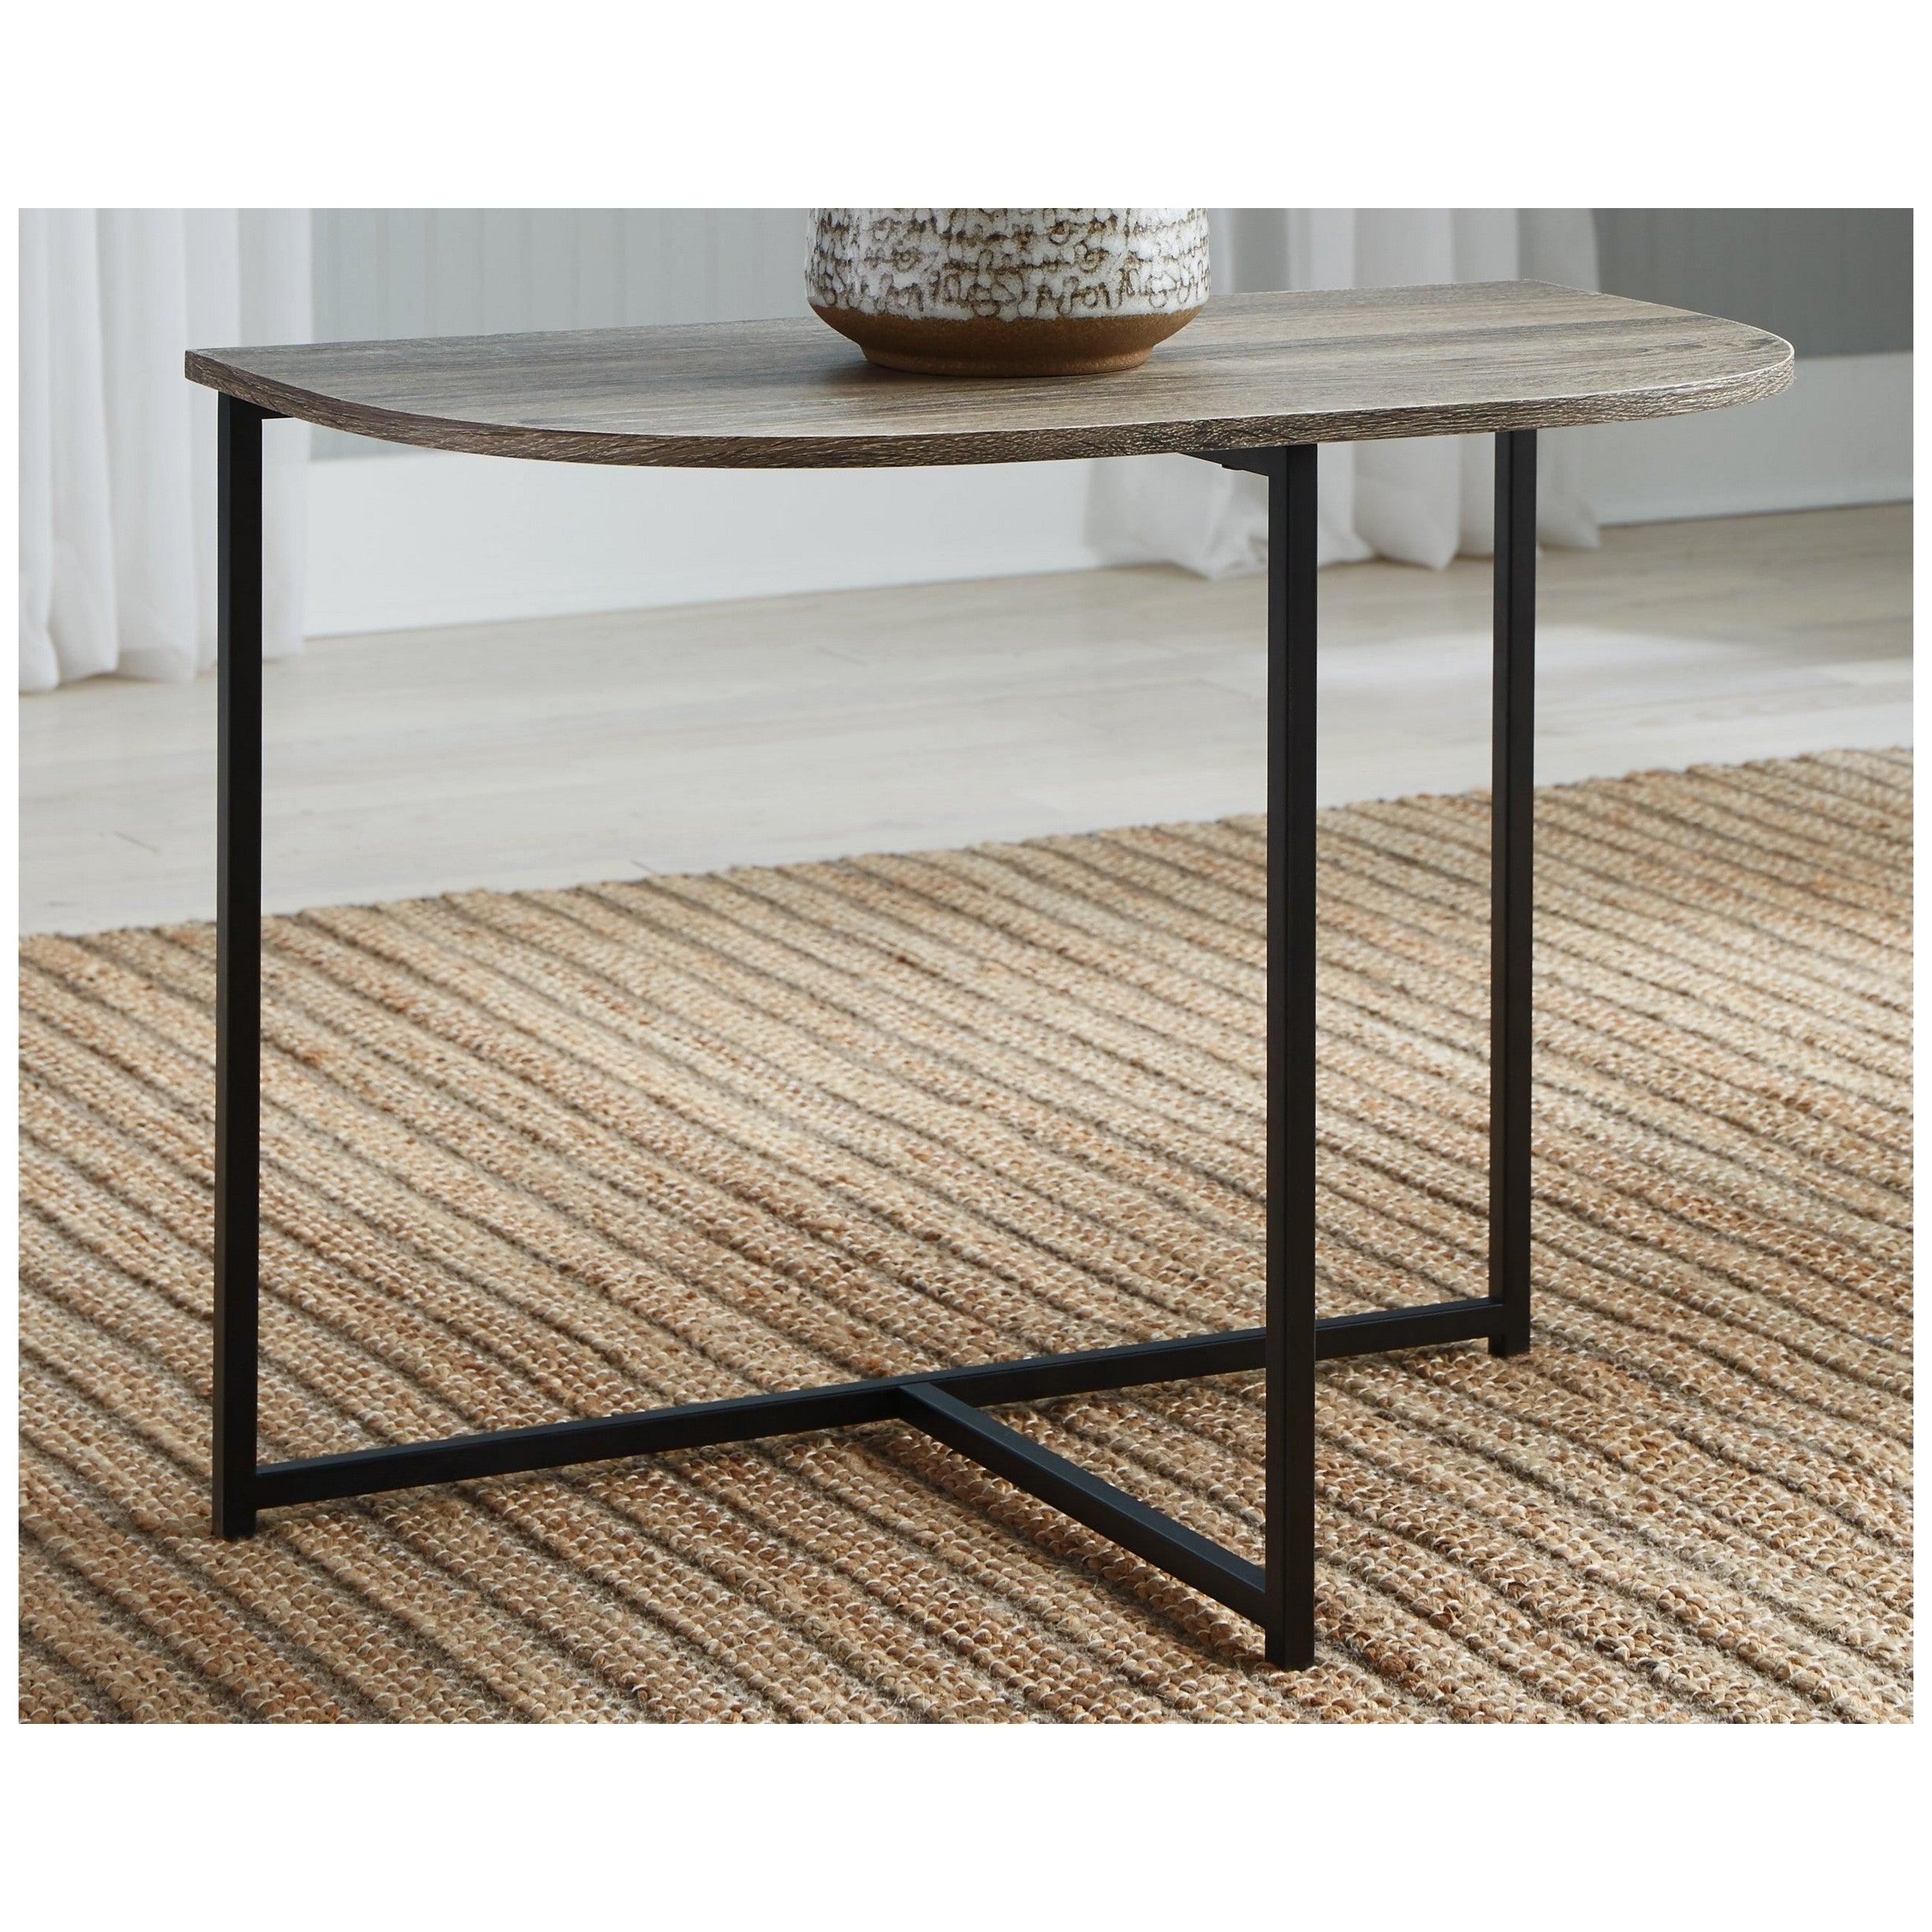 Wadeworth Chairside End Table Ash-T103-7